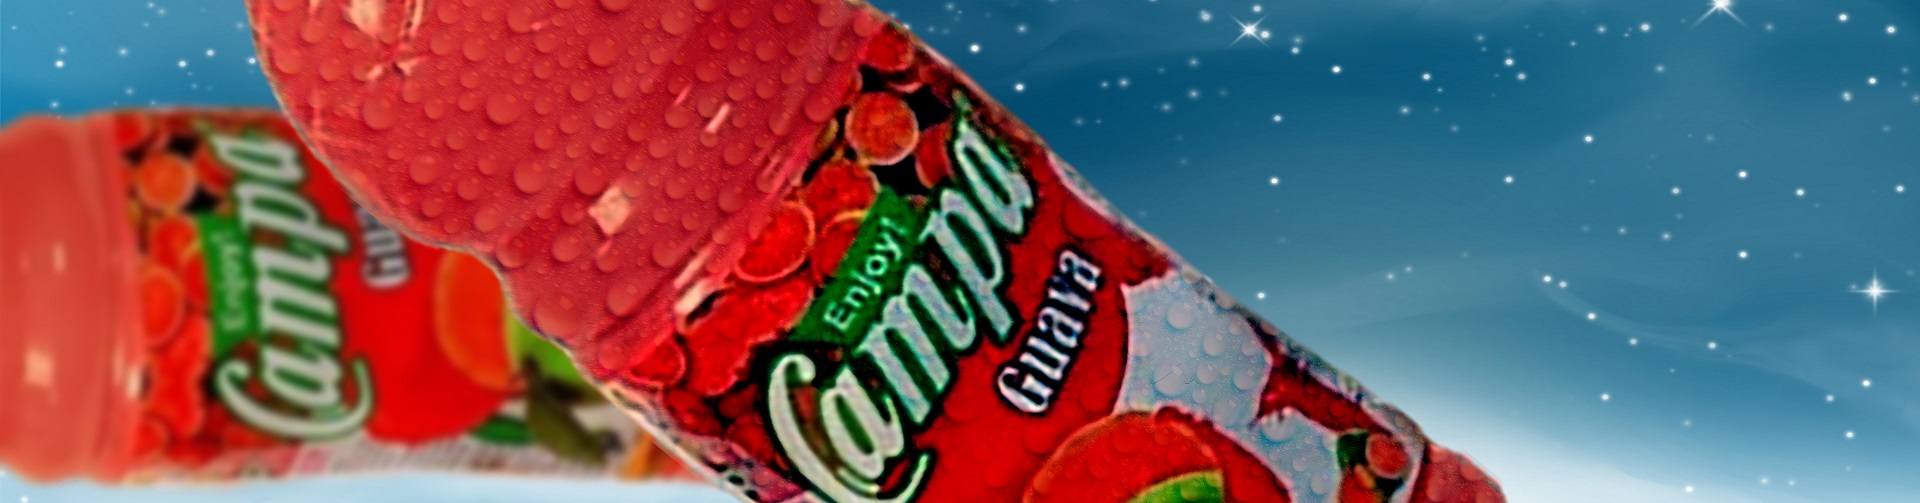 Advertisement banner for Campa Guava